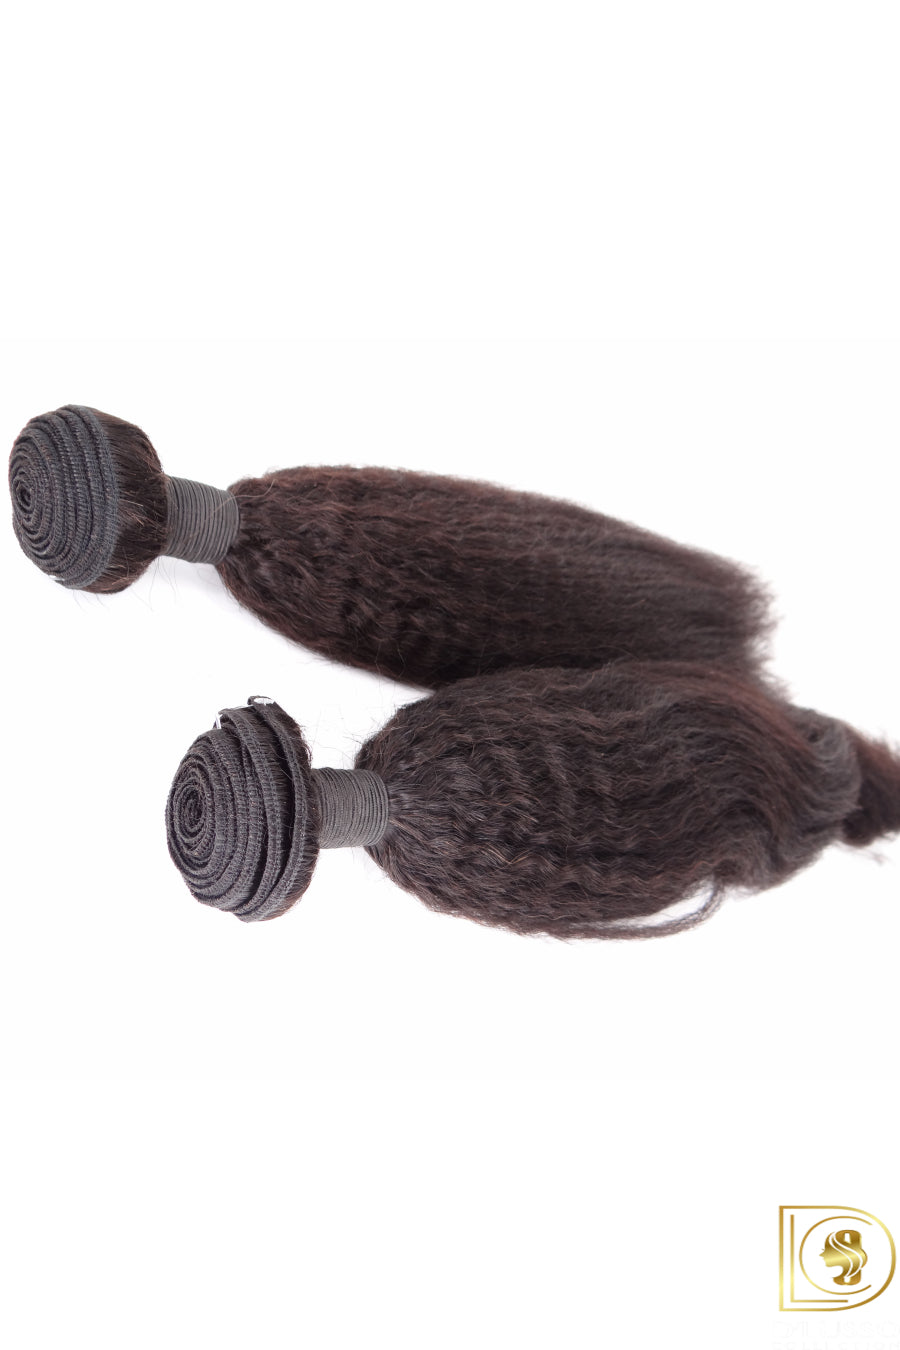 Relaxed/straight blowout weft extensions 100g